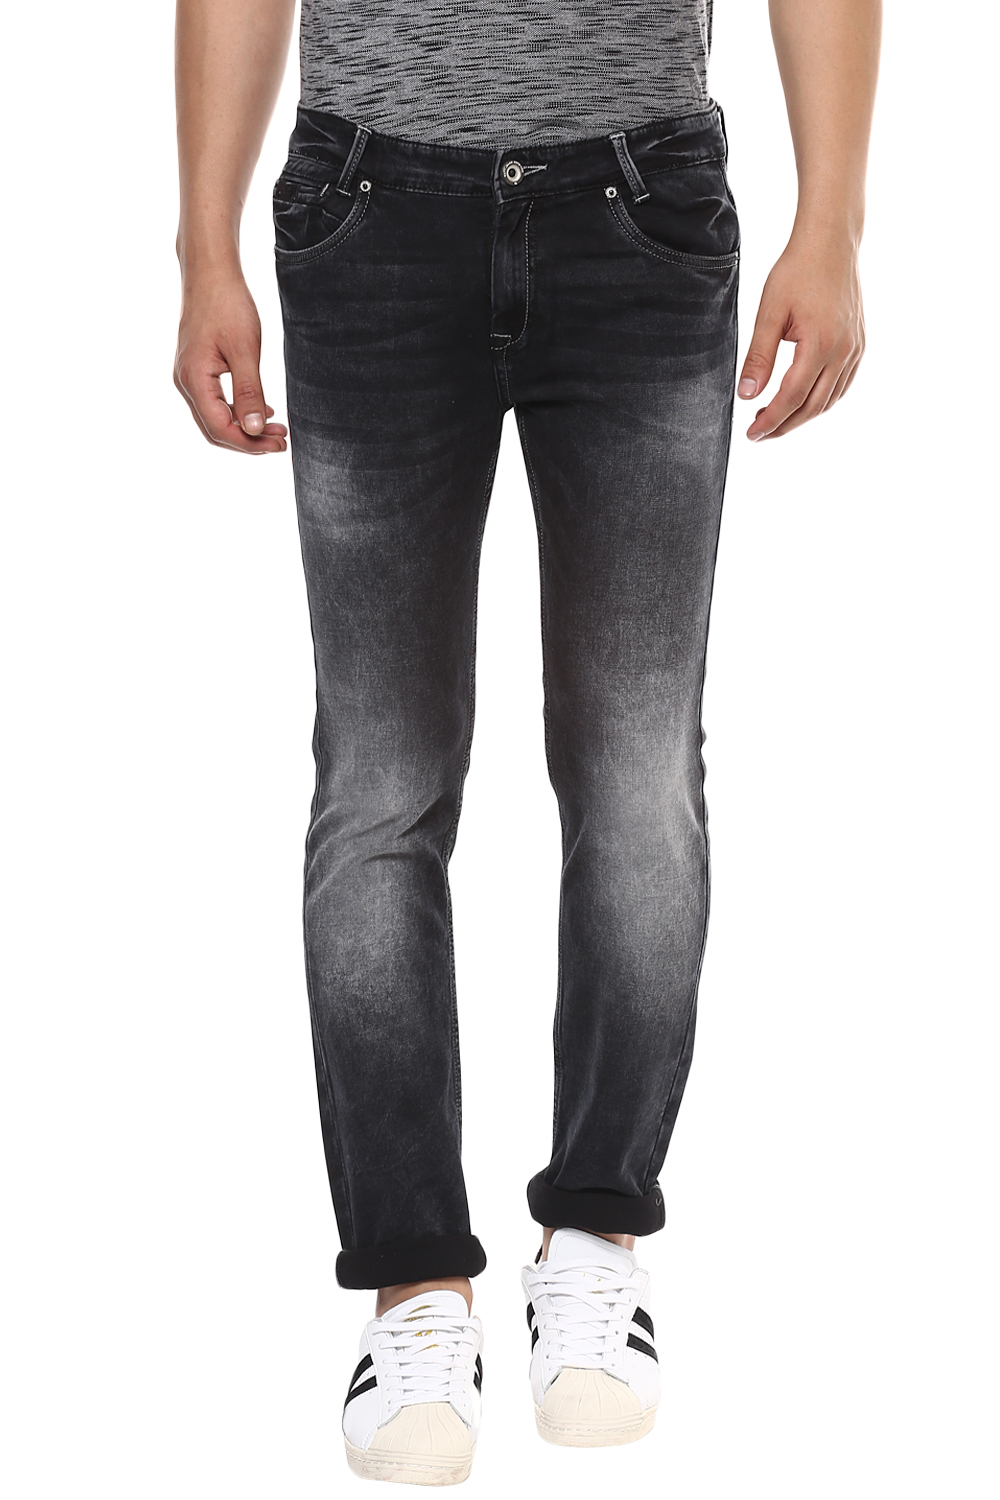 Buy Mufti Black Jeans Online @ ₹1849 from ShopClues